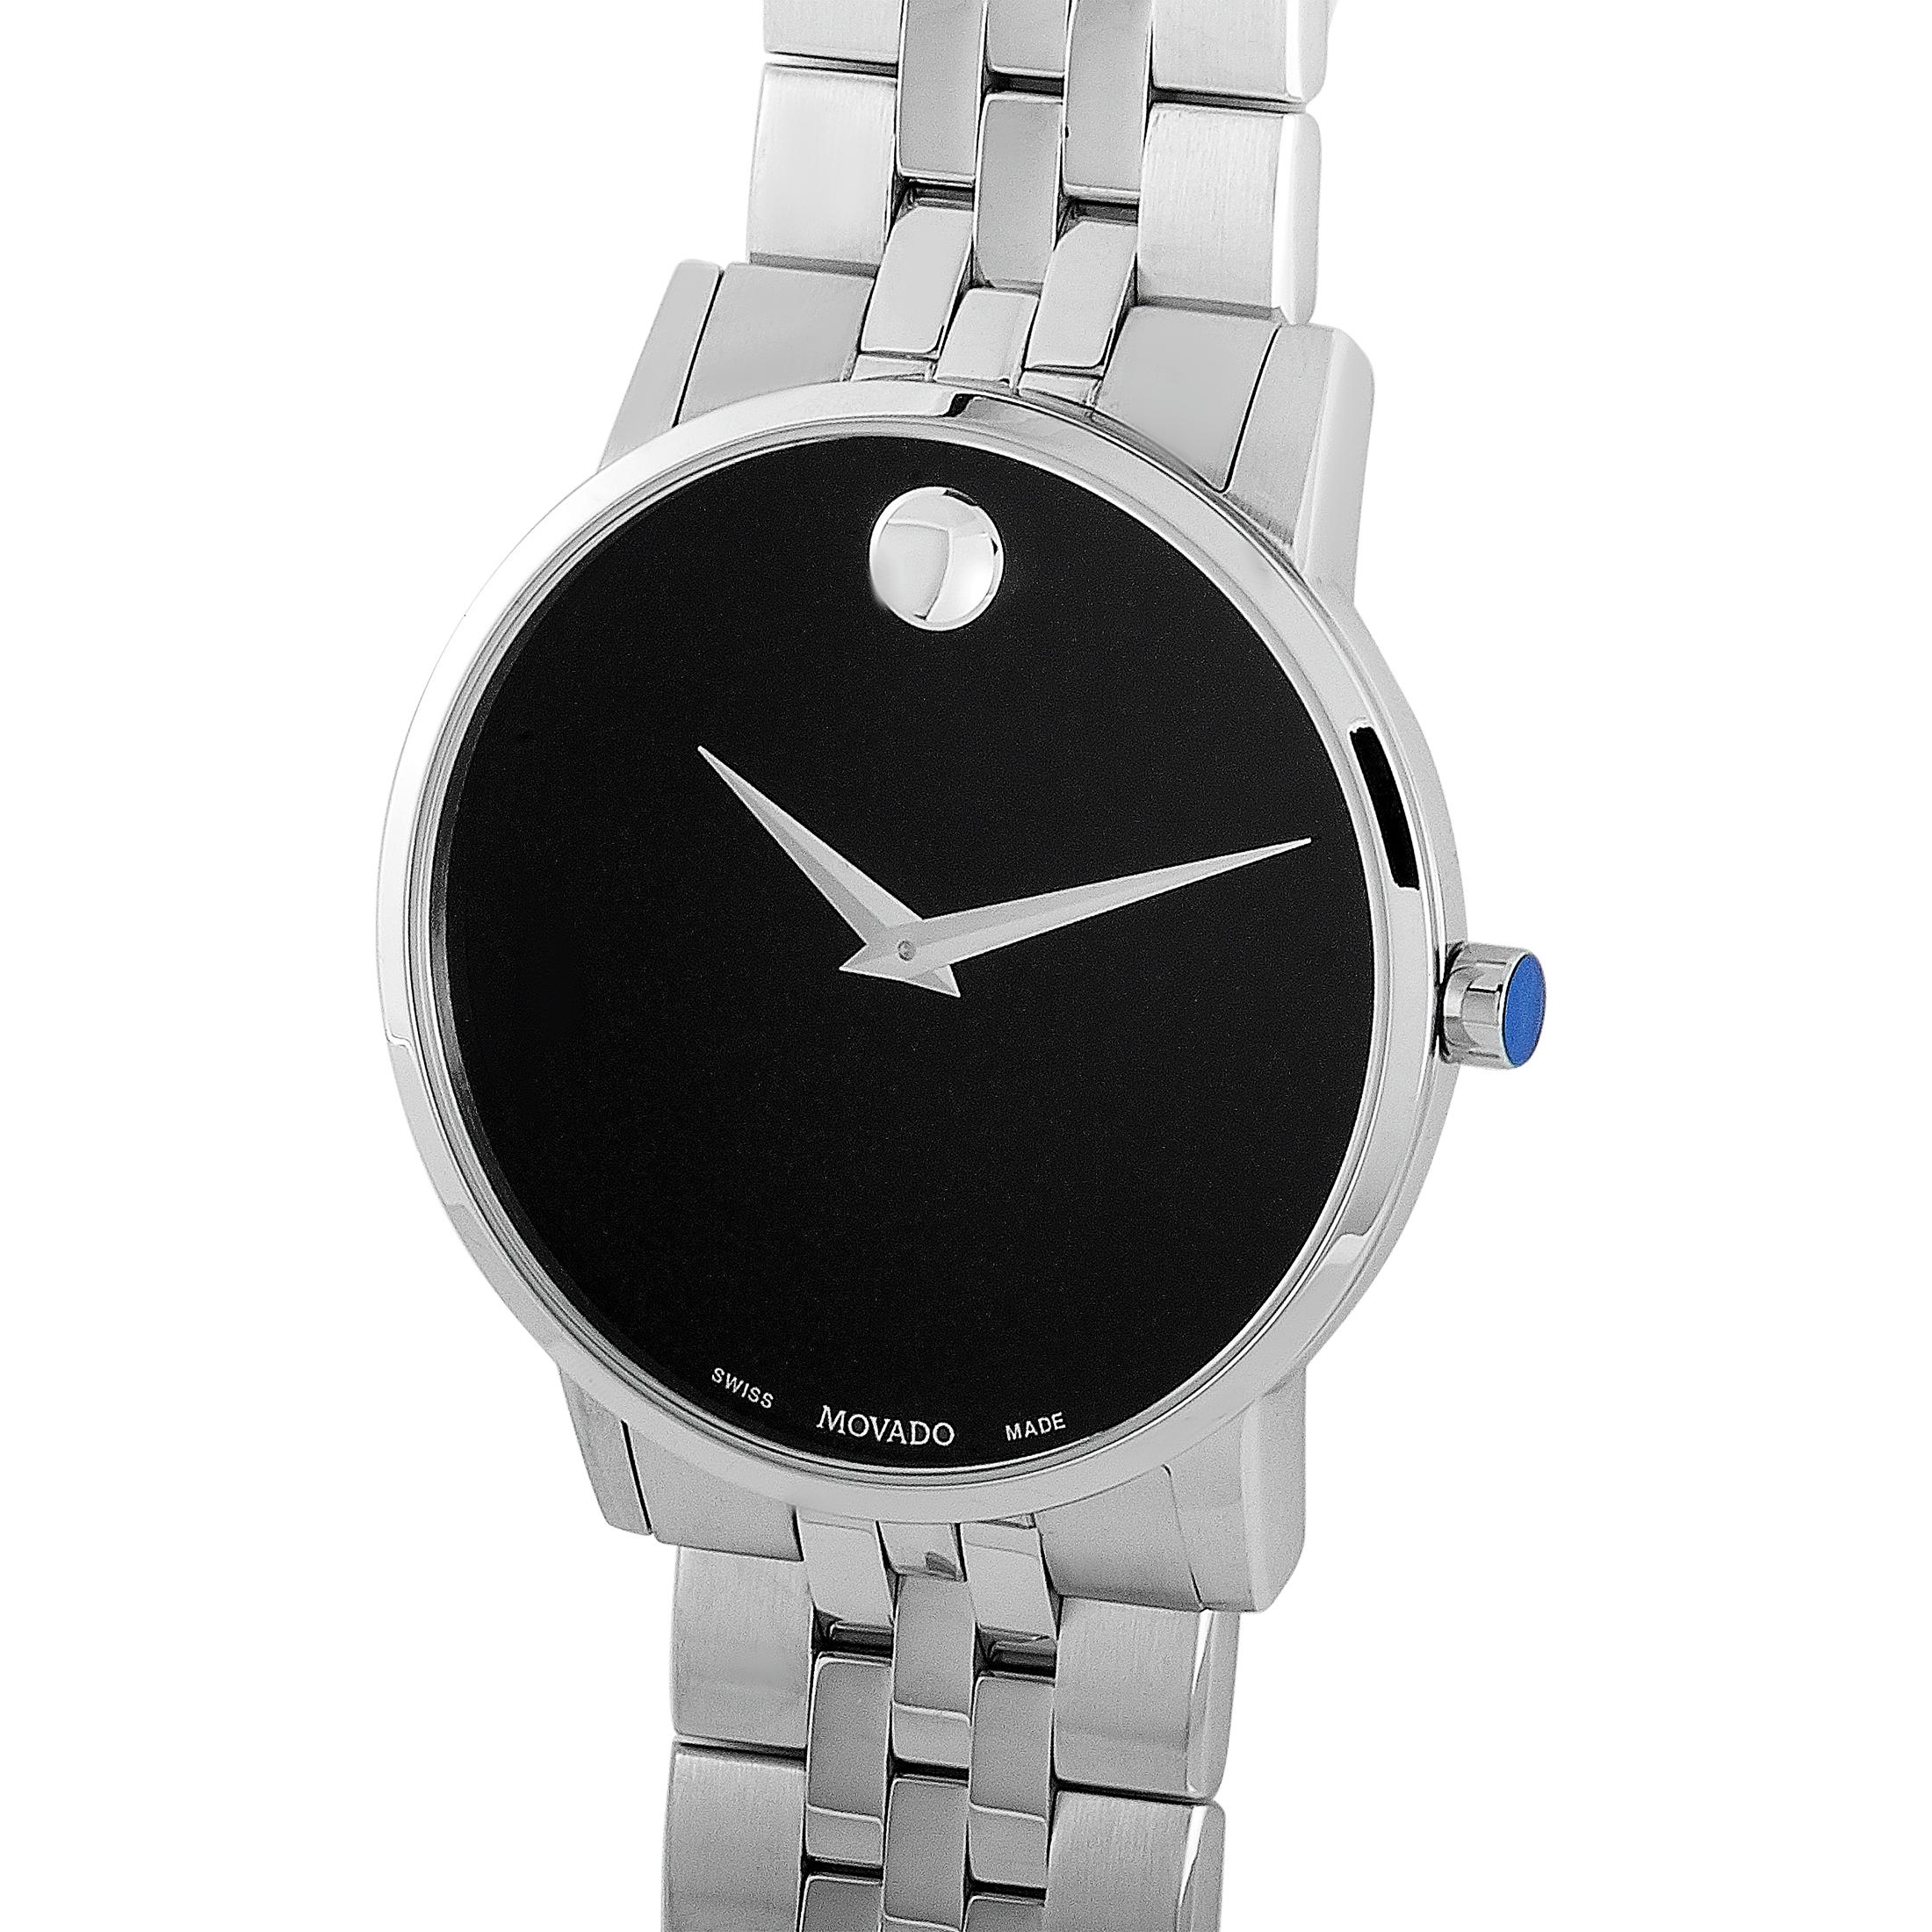 The Movado Museum Classic watch, reference number 0607199, is a member of the esteemed “Museum Classic” collection.

This timepiece is presented with a 40 mm stainless steel case that is mounted onto a matching stainless steel bracelet. The watch is